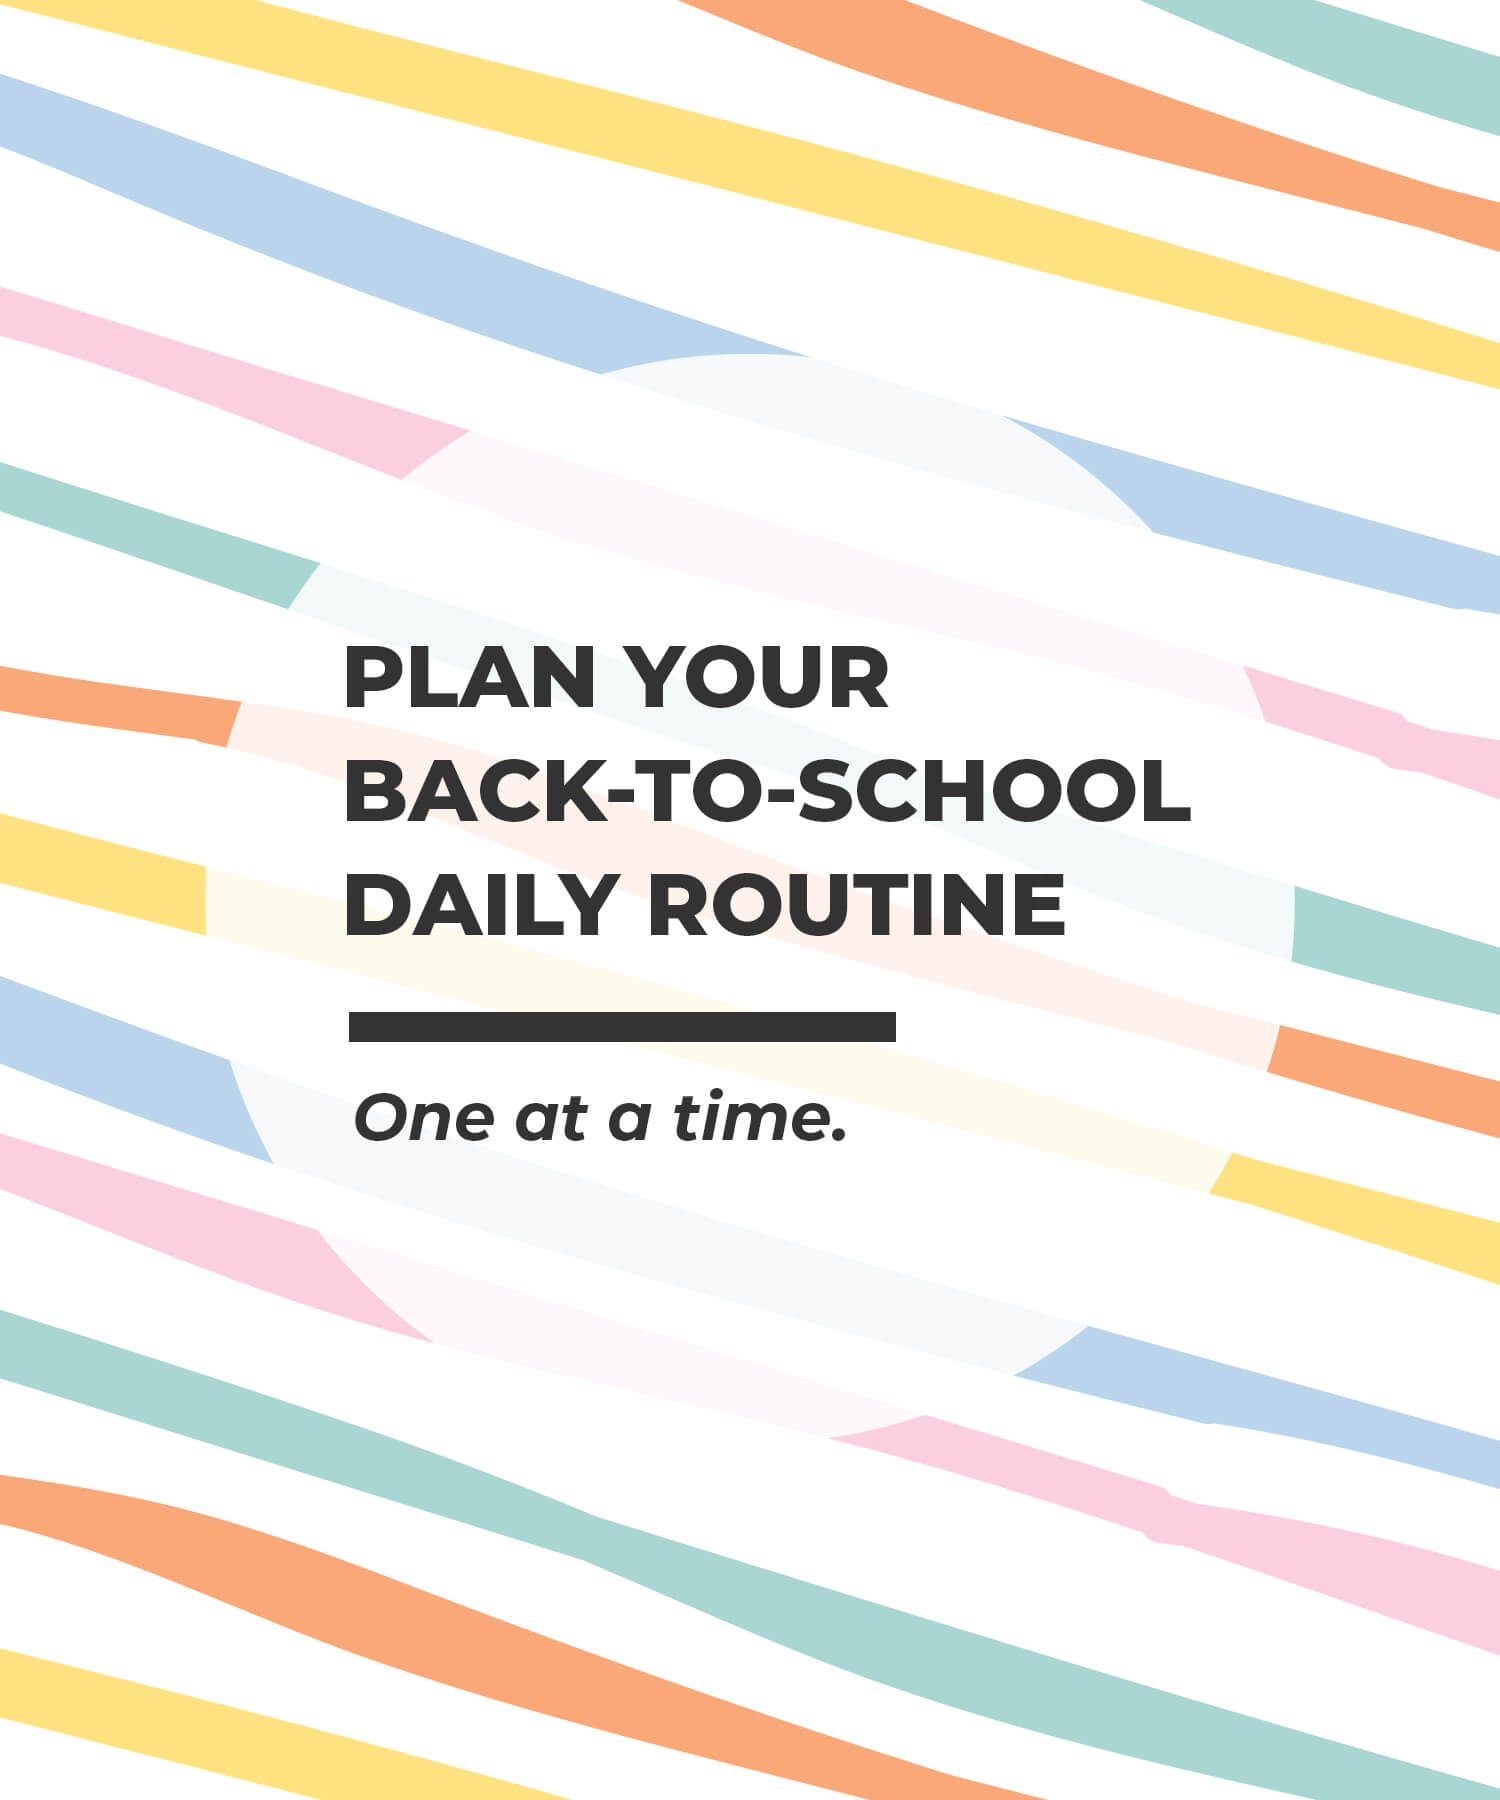 Plan your back-to-scholl daily routine – One at a time